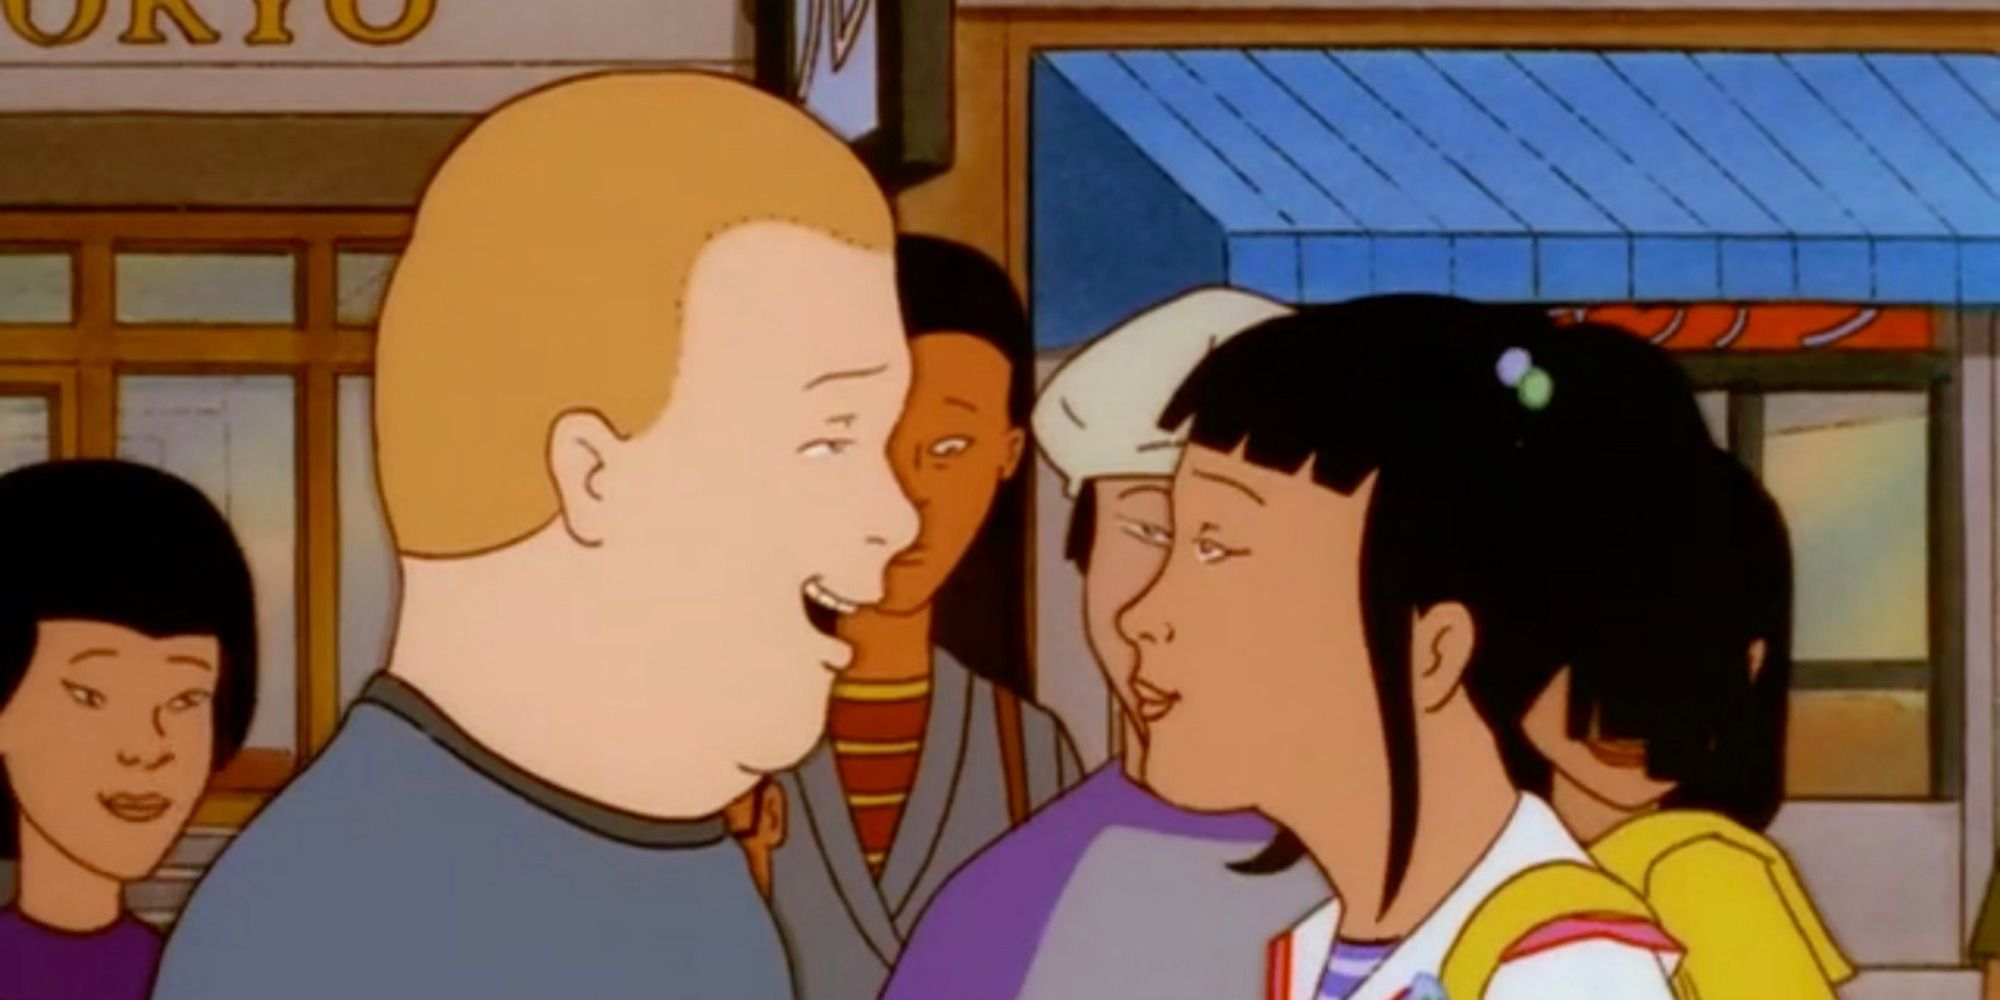 A scene featuring characters from King of the Hill